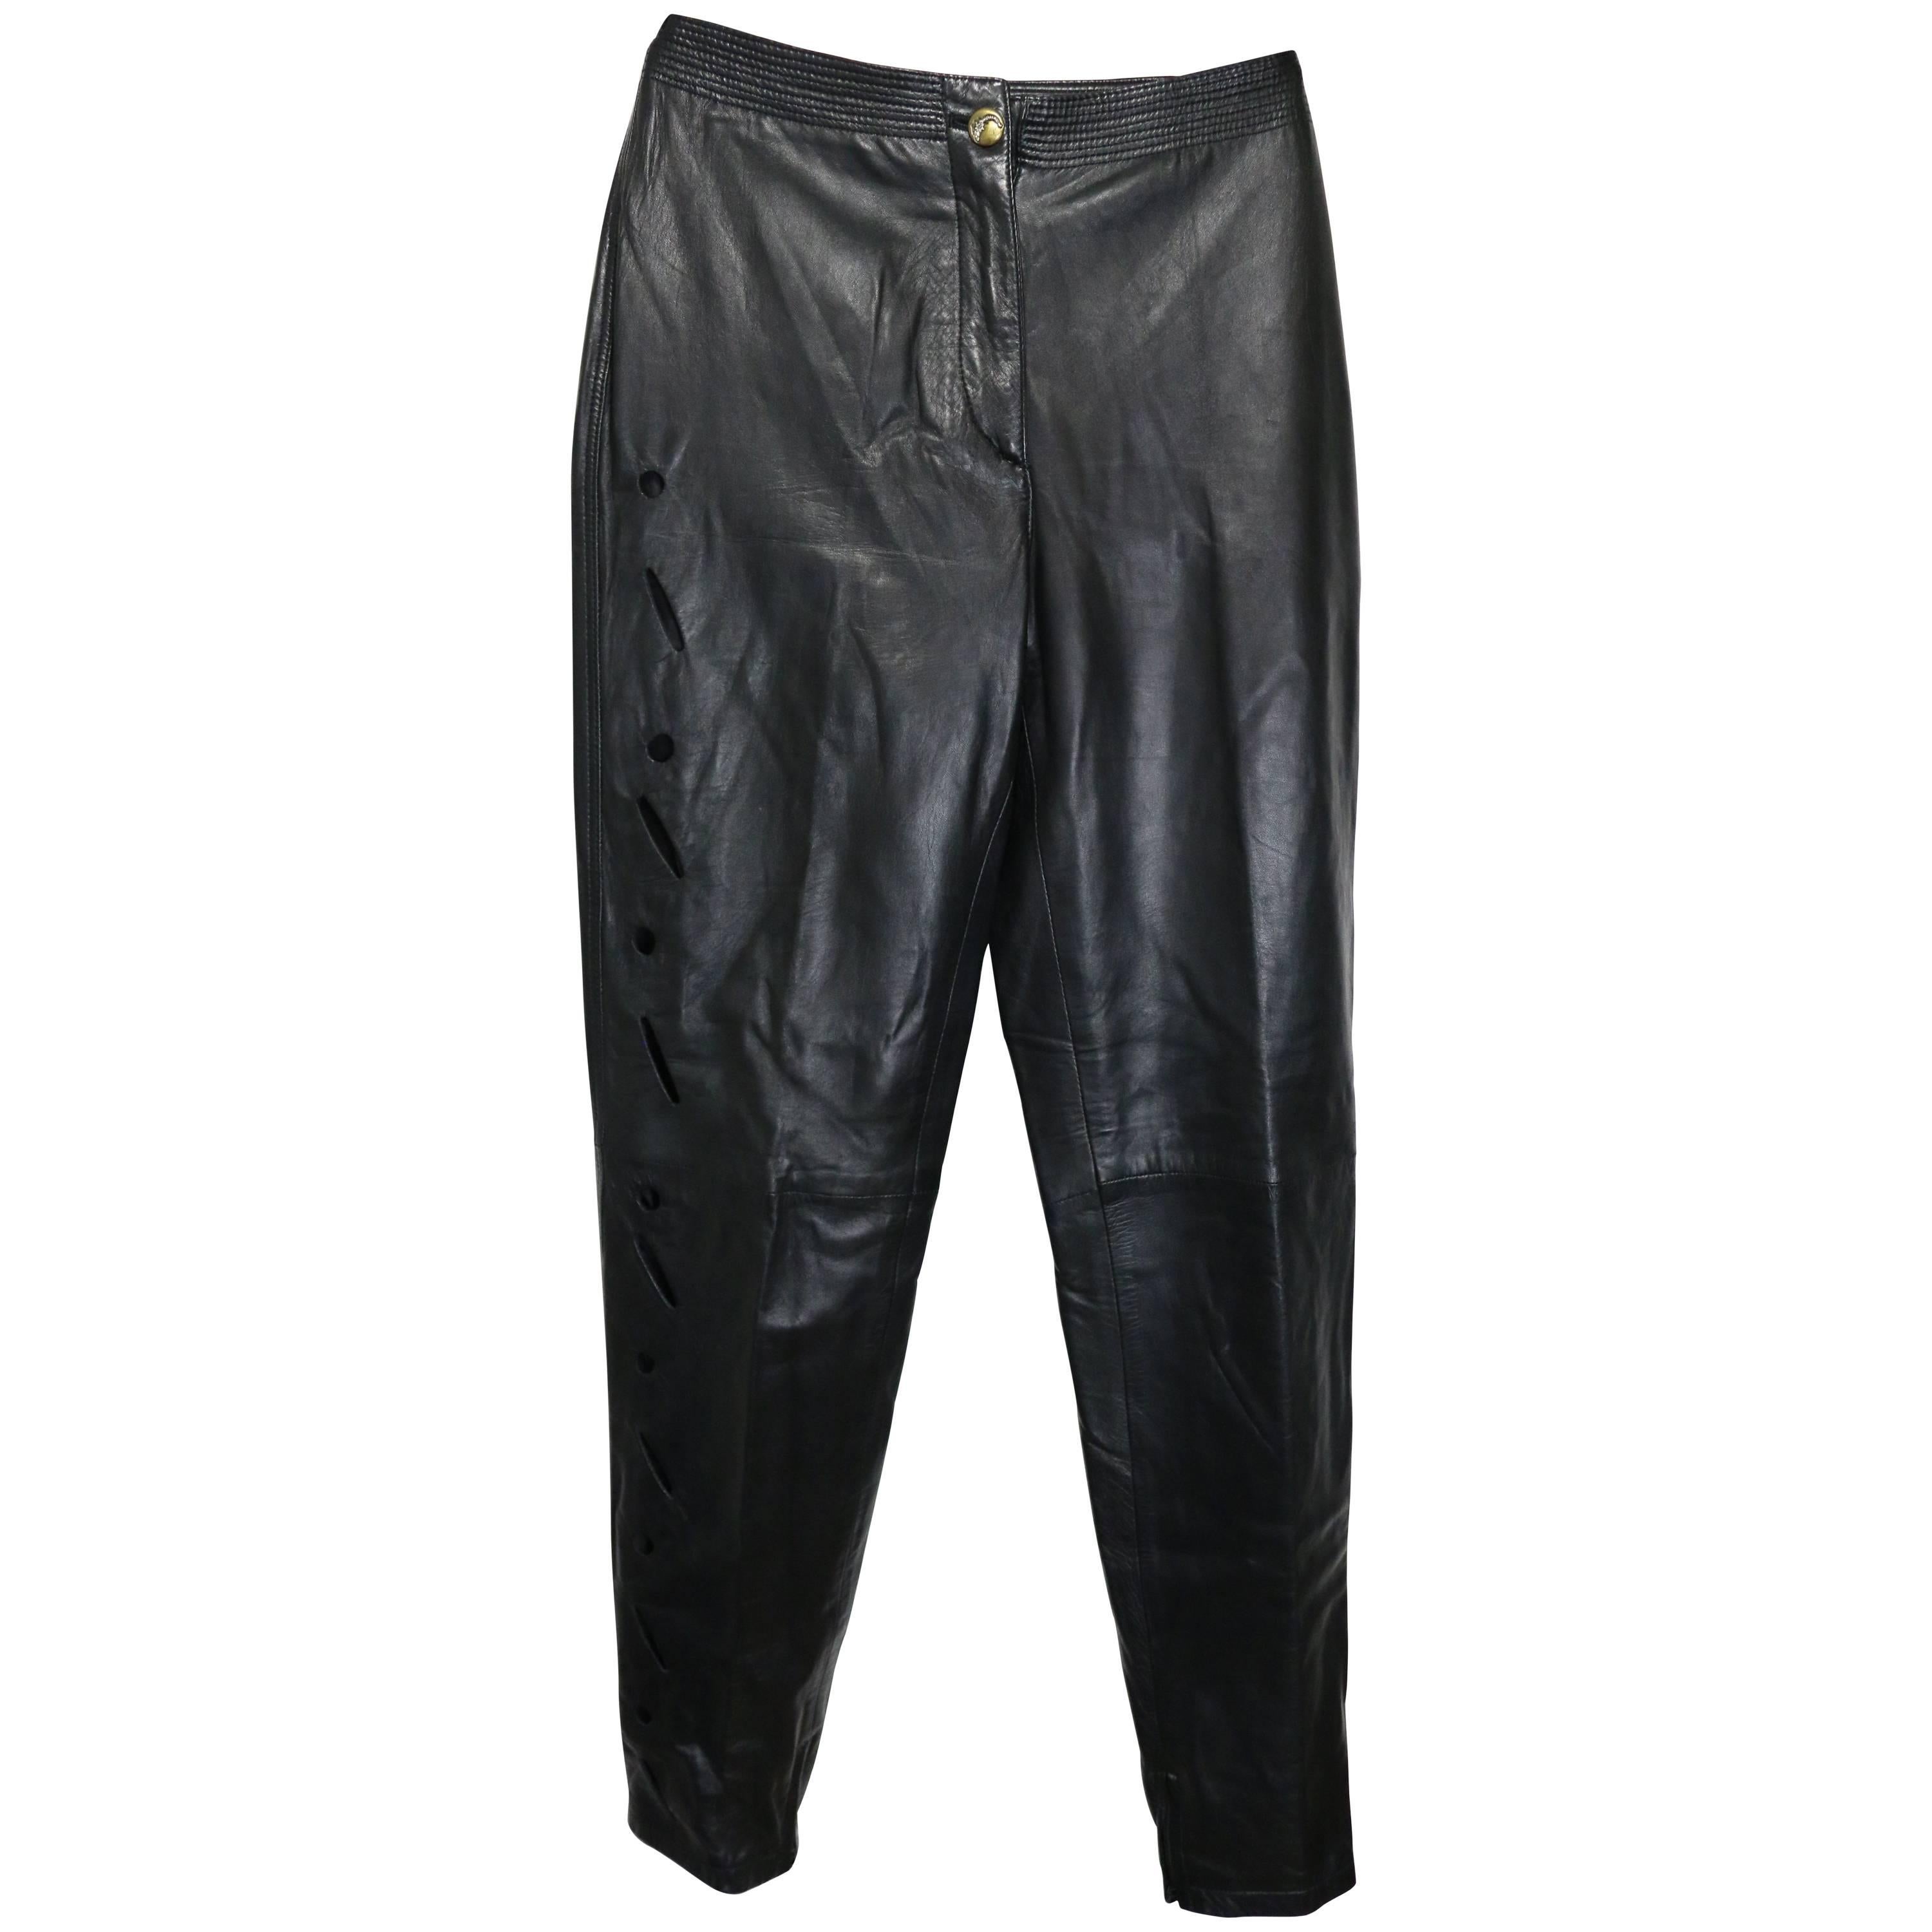 Vintage Istante by Gianni Versace Black Leather with Cutout Pattern Pants